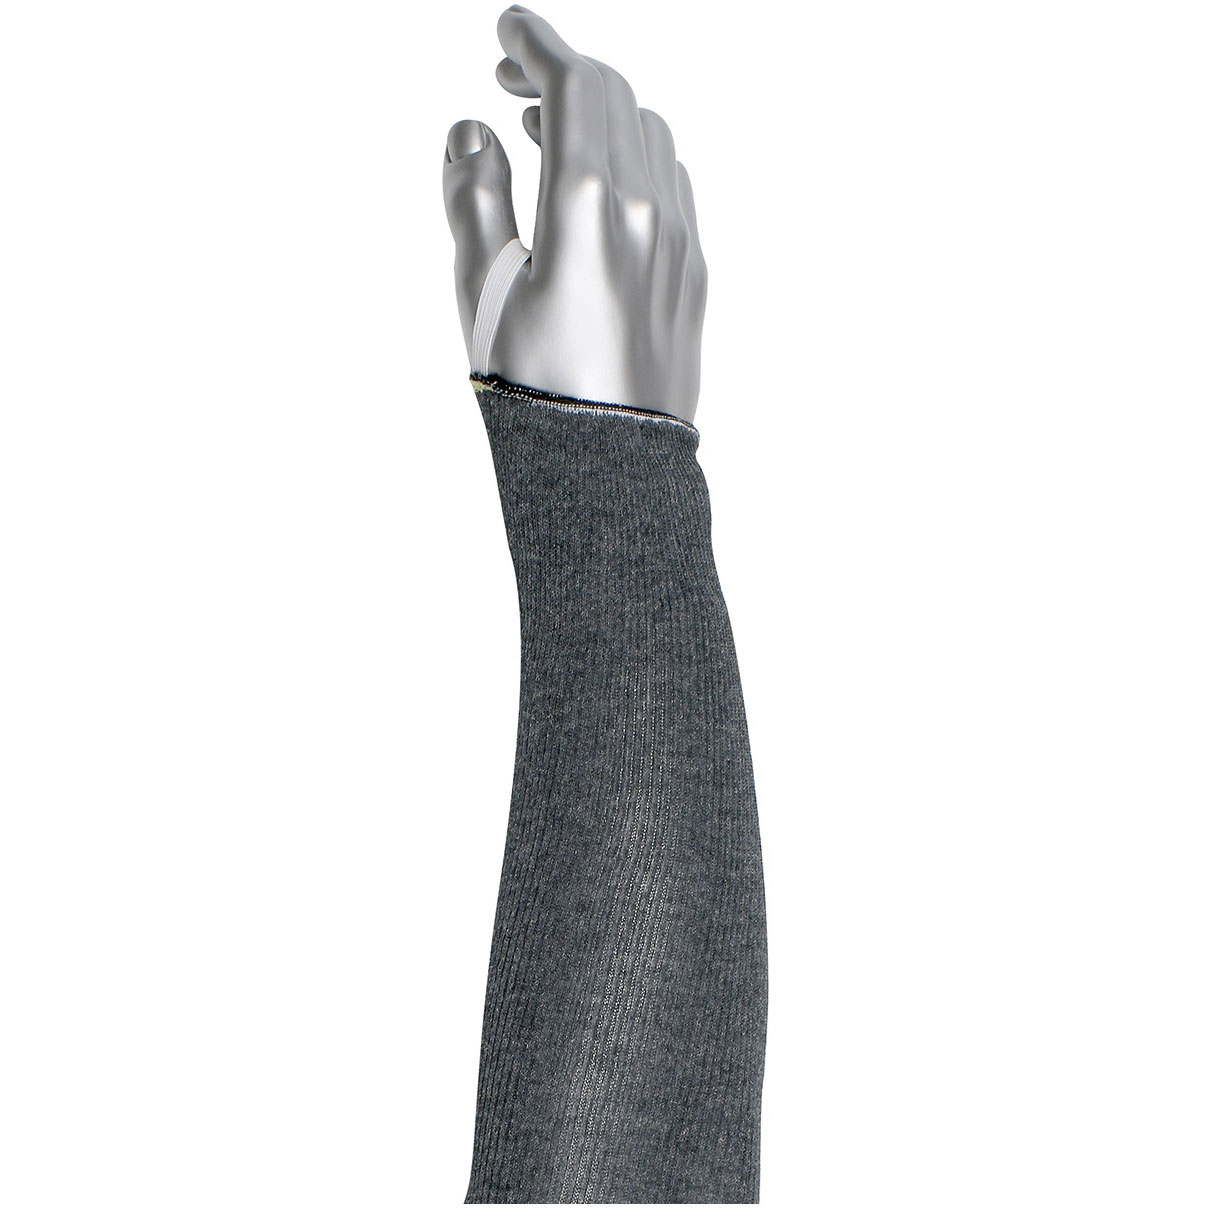 PIP Kevlar Blended Sleeve with Smart Fit and Elastic Thumb